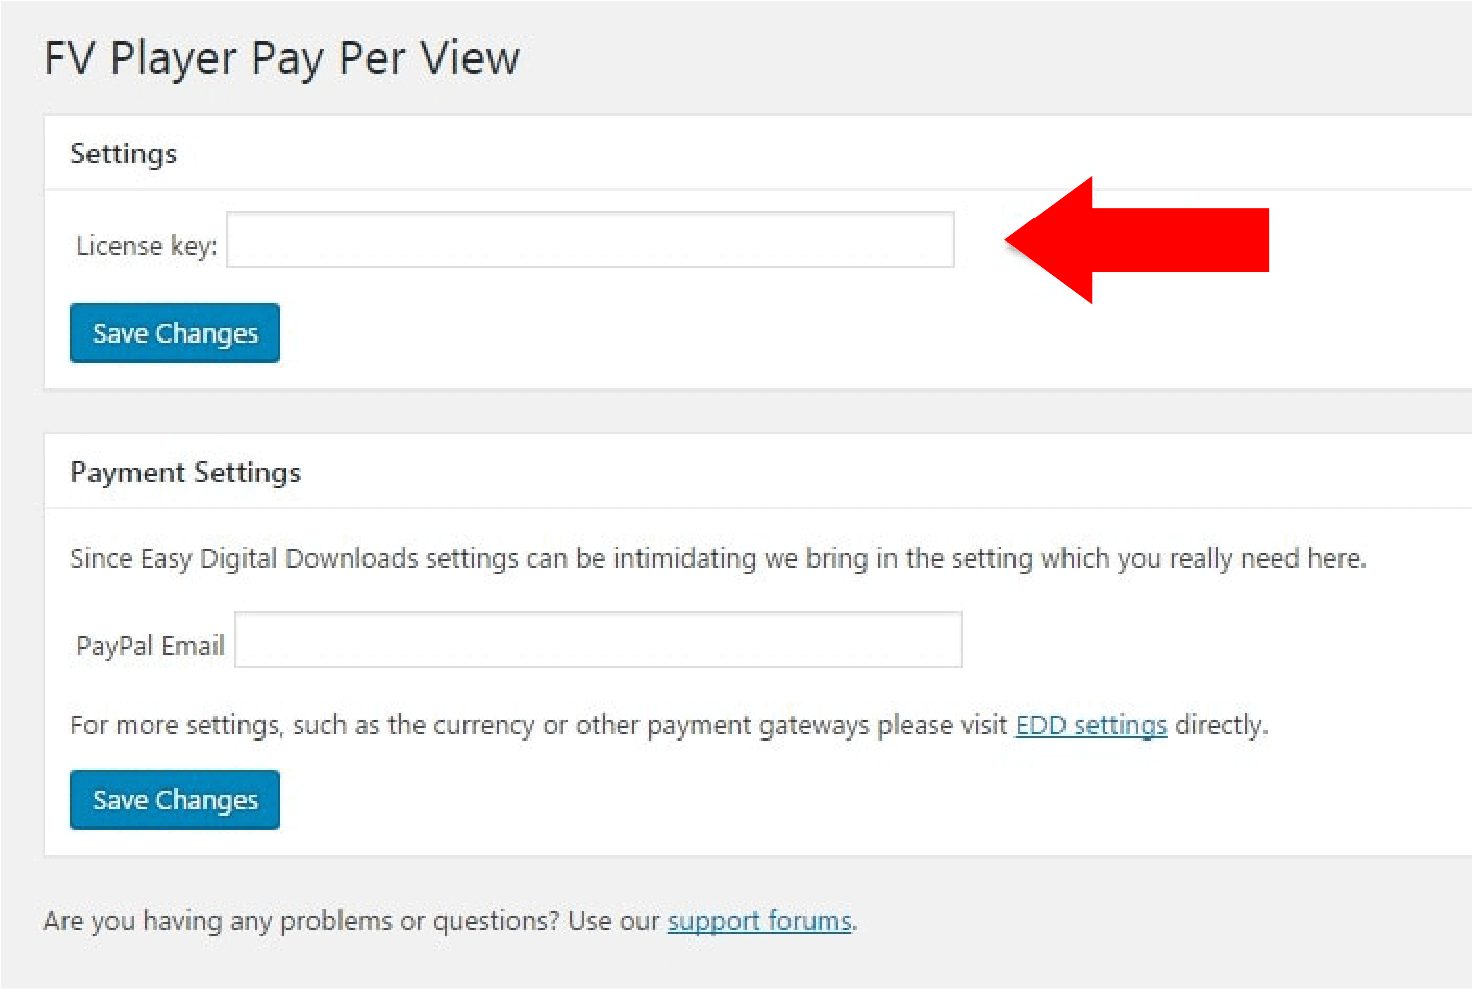 How to use FV Player Pay Per View for WooCommerce